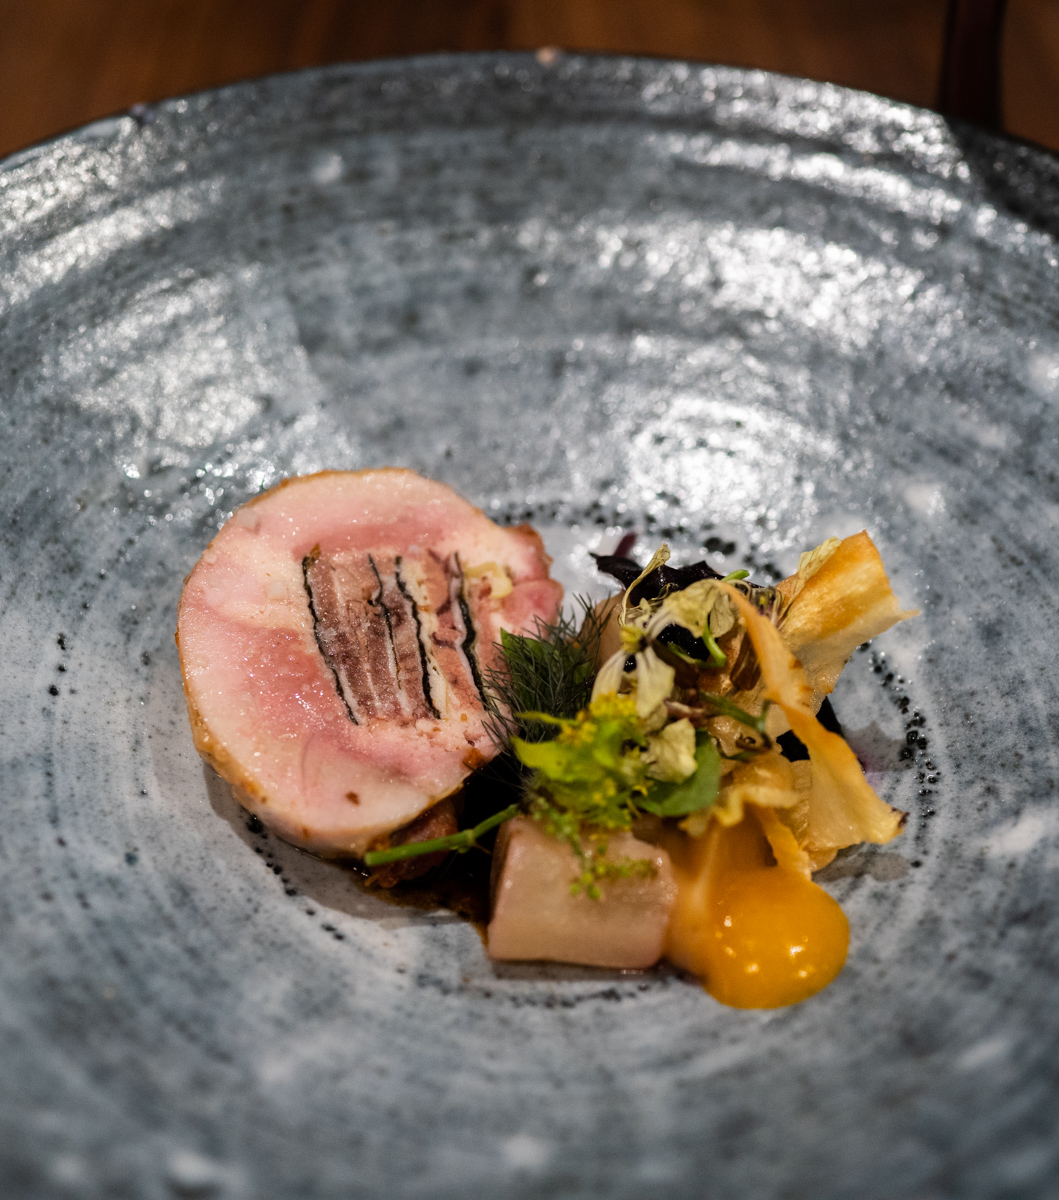 pigeon filled with veal + nori, lobster sauce, salsify, parsnip purée, chips,  kumquat?